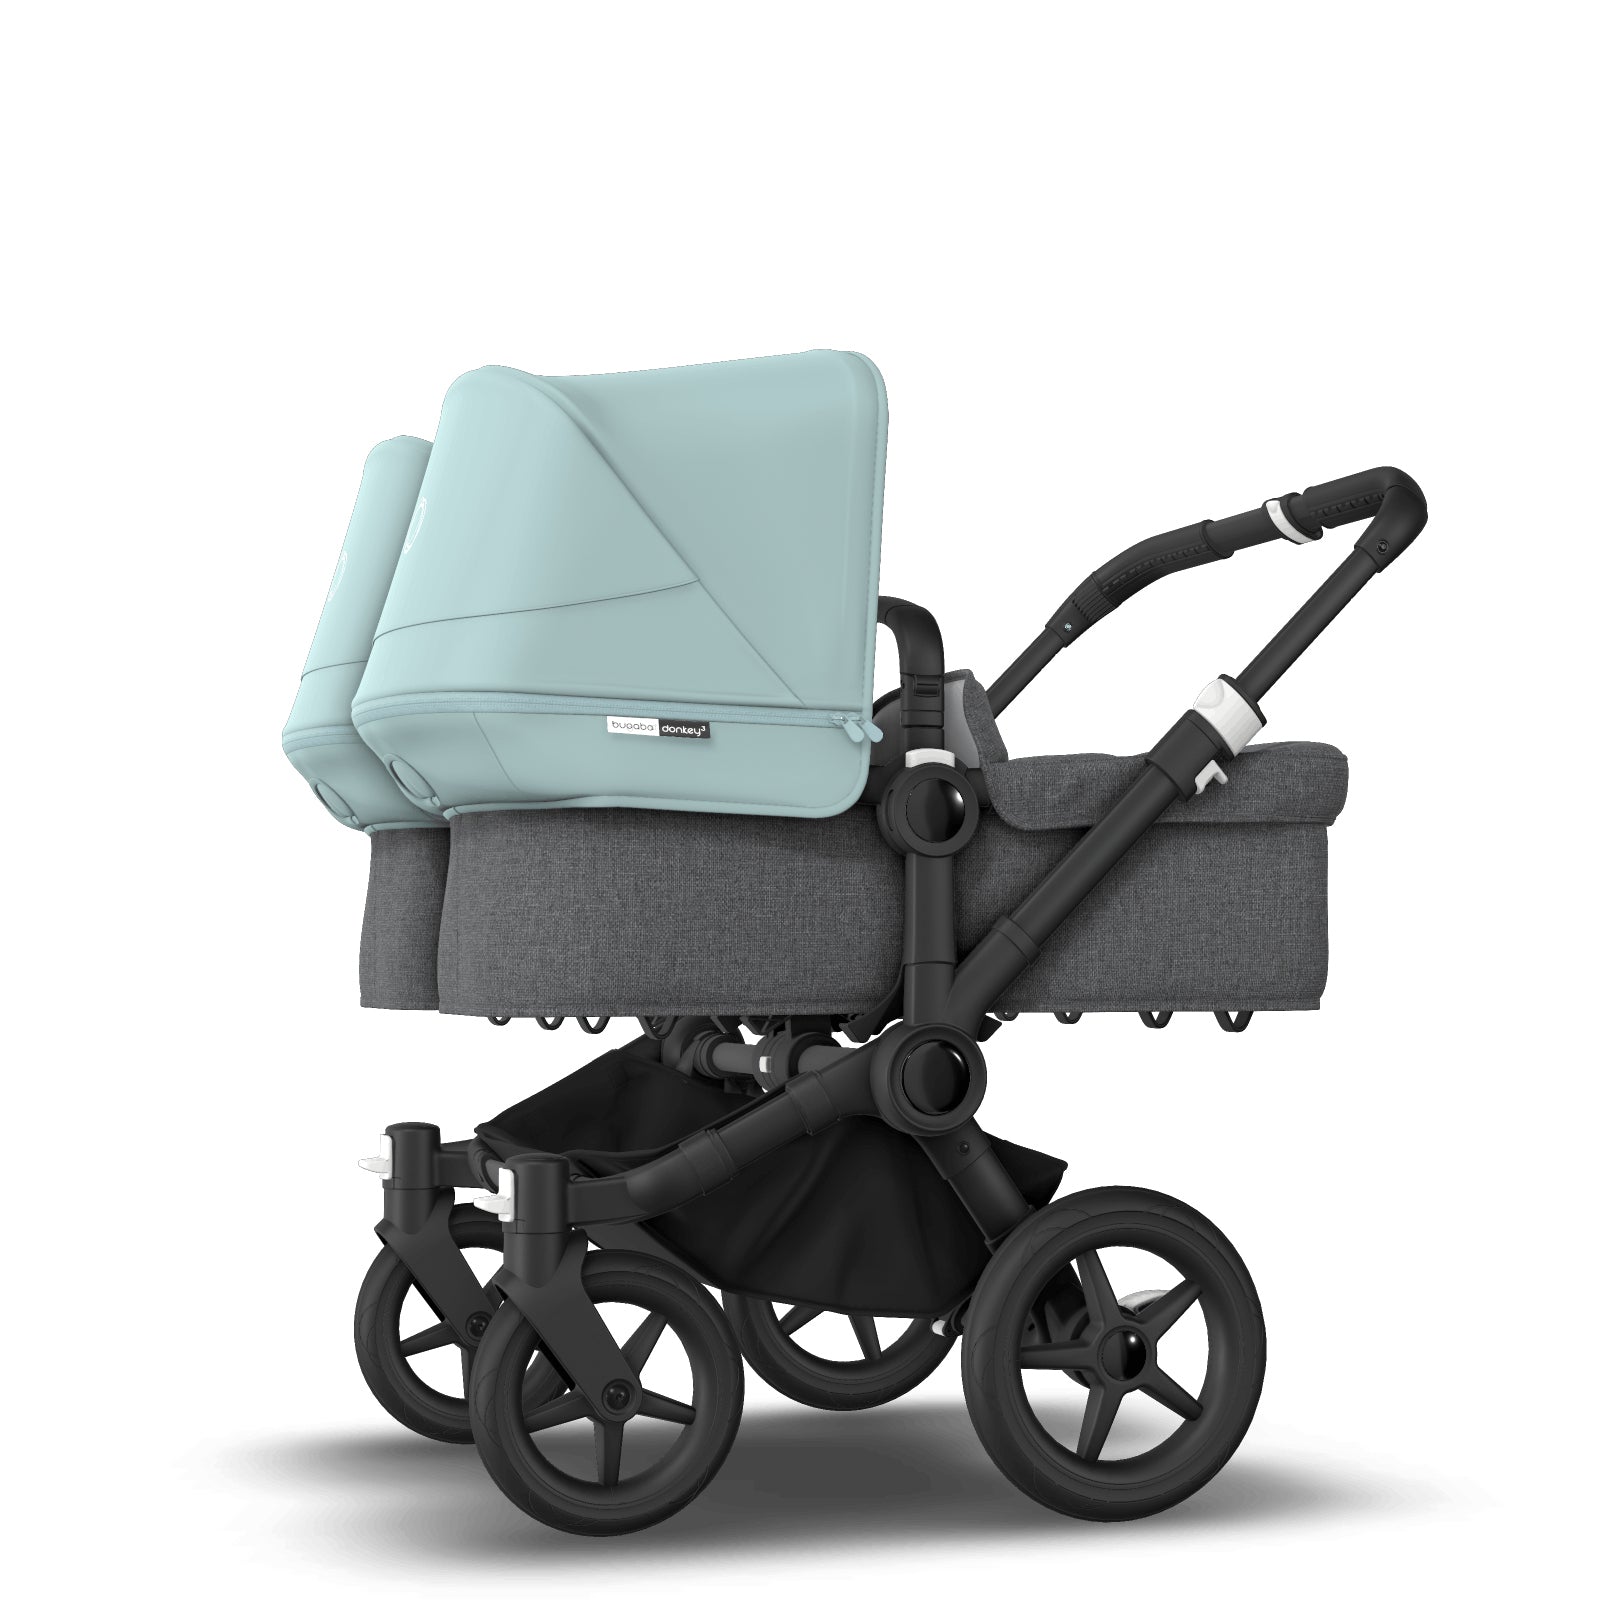 Bugaboo Donkey 3 Twin Seat and Carrycot Pushchair - Vapor Blue